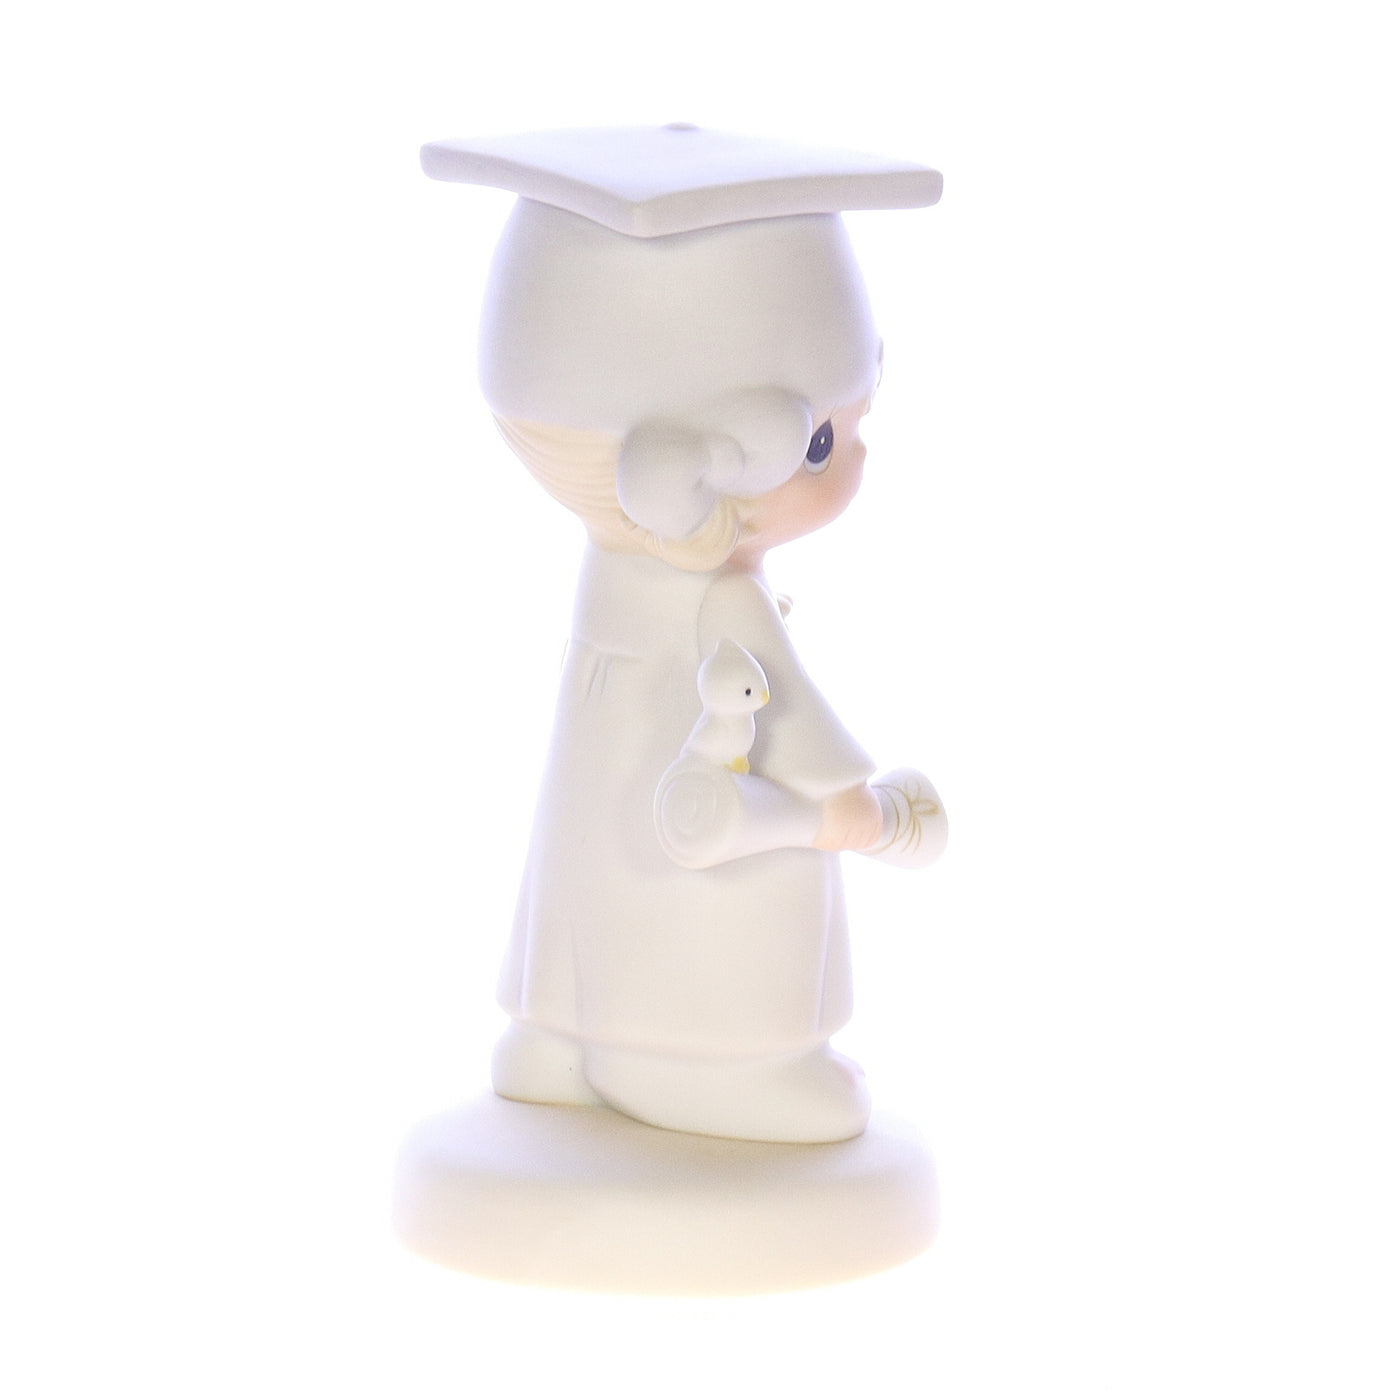 Precious_Moments_E-4721_The_Lord_Bless_You_And_Keep_You_Graduation_Figurine_1980 Right View